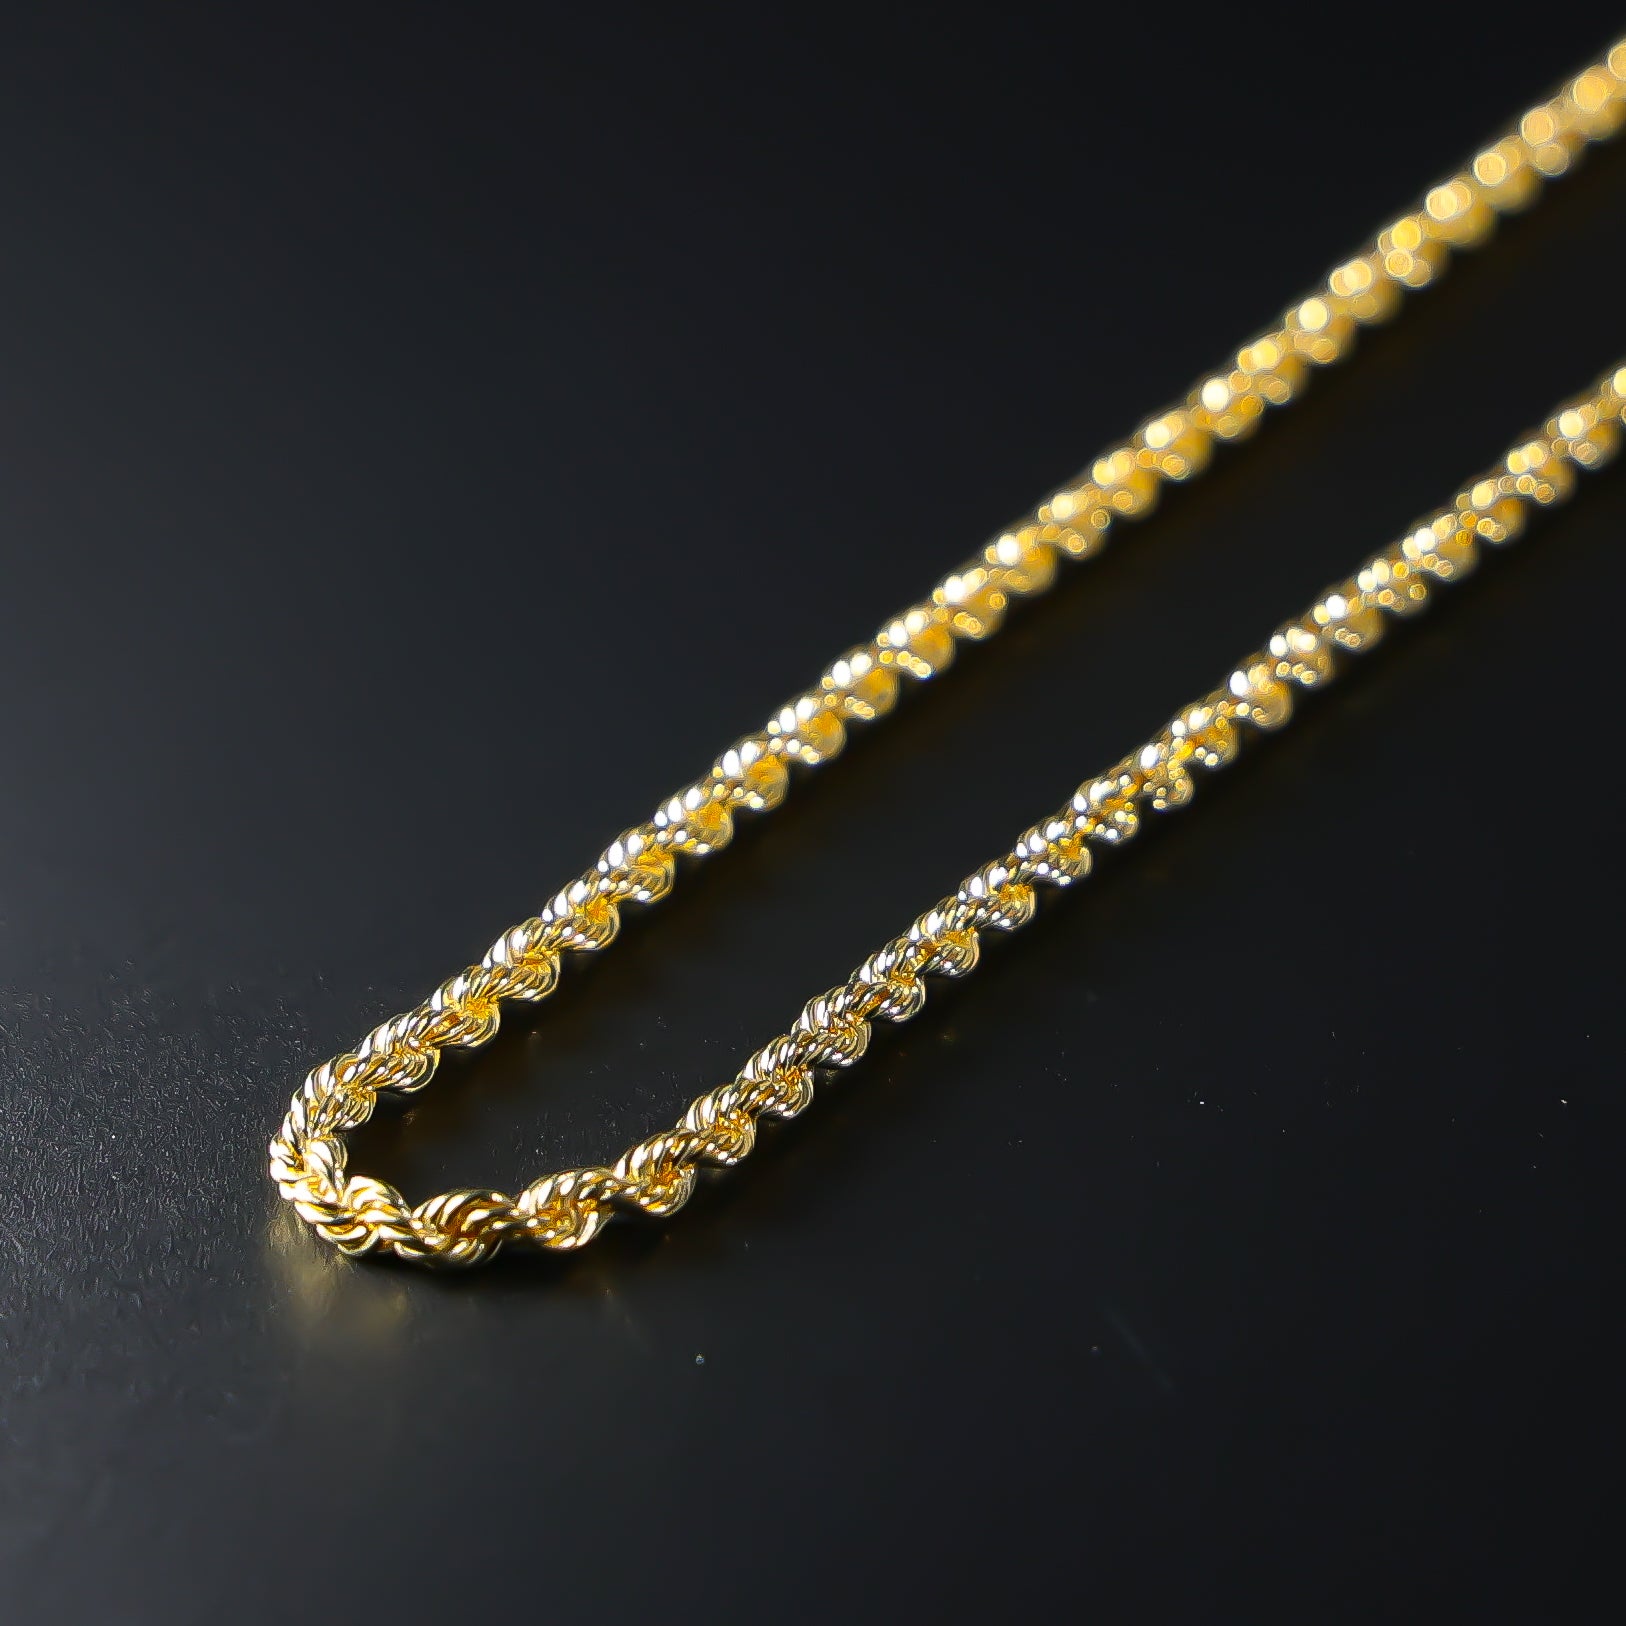 Gold 3mm Hollow Rope Chain Model-0435 - Charlie & Co. Jewelry